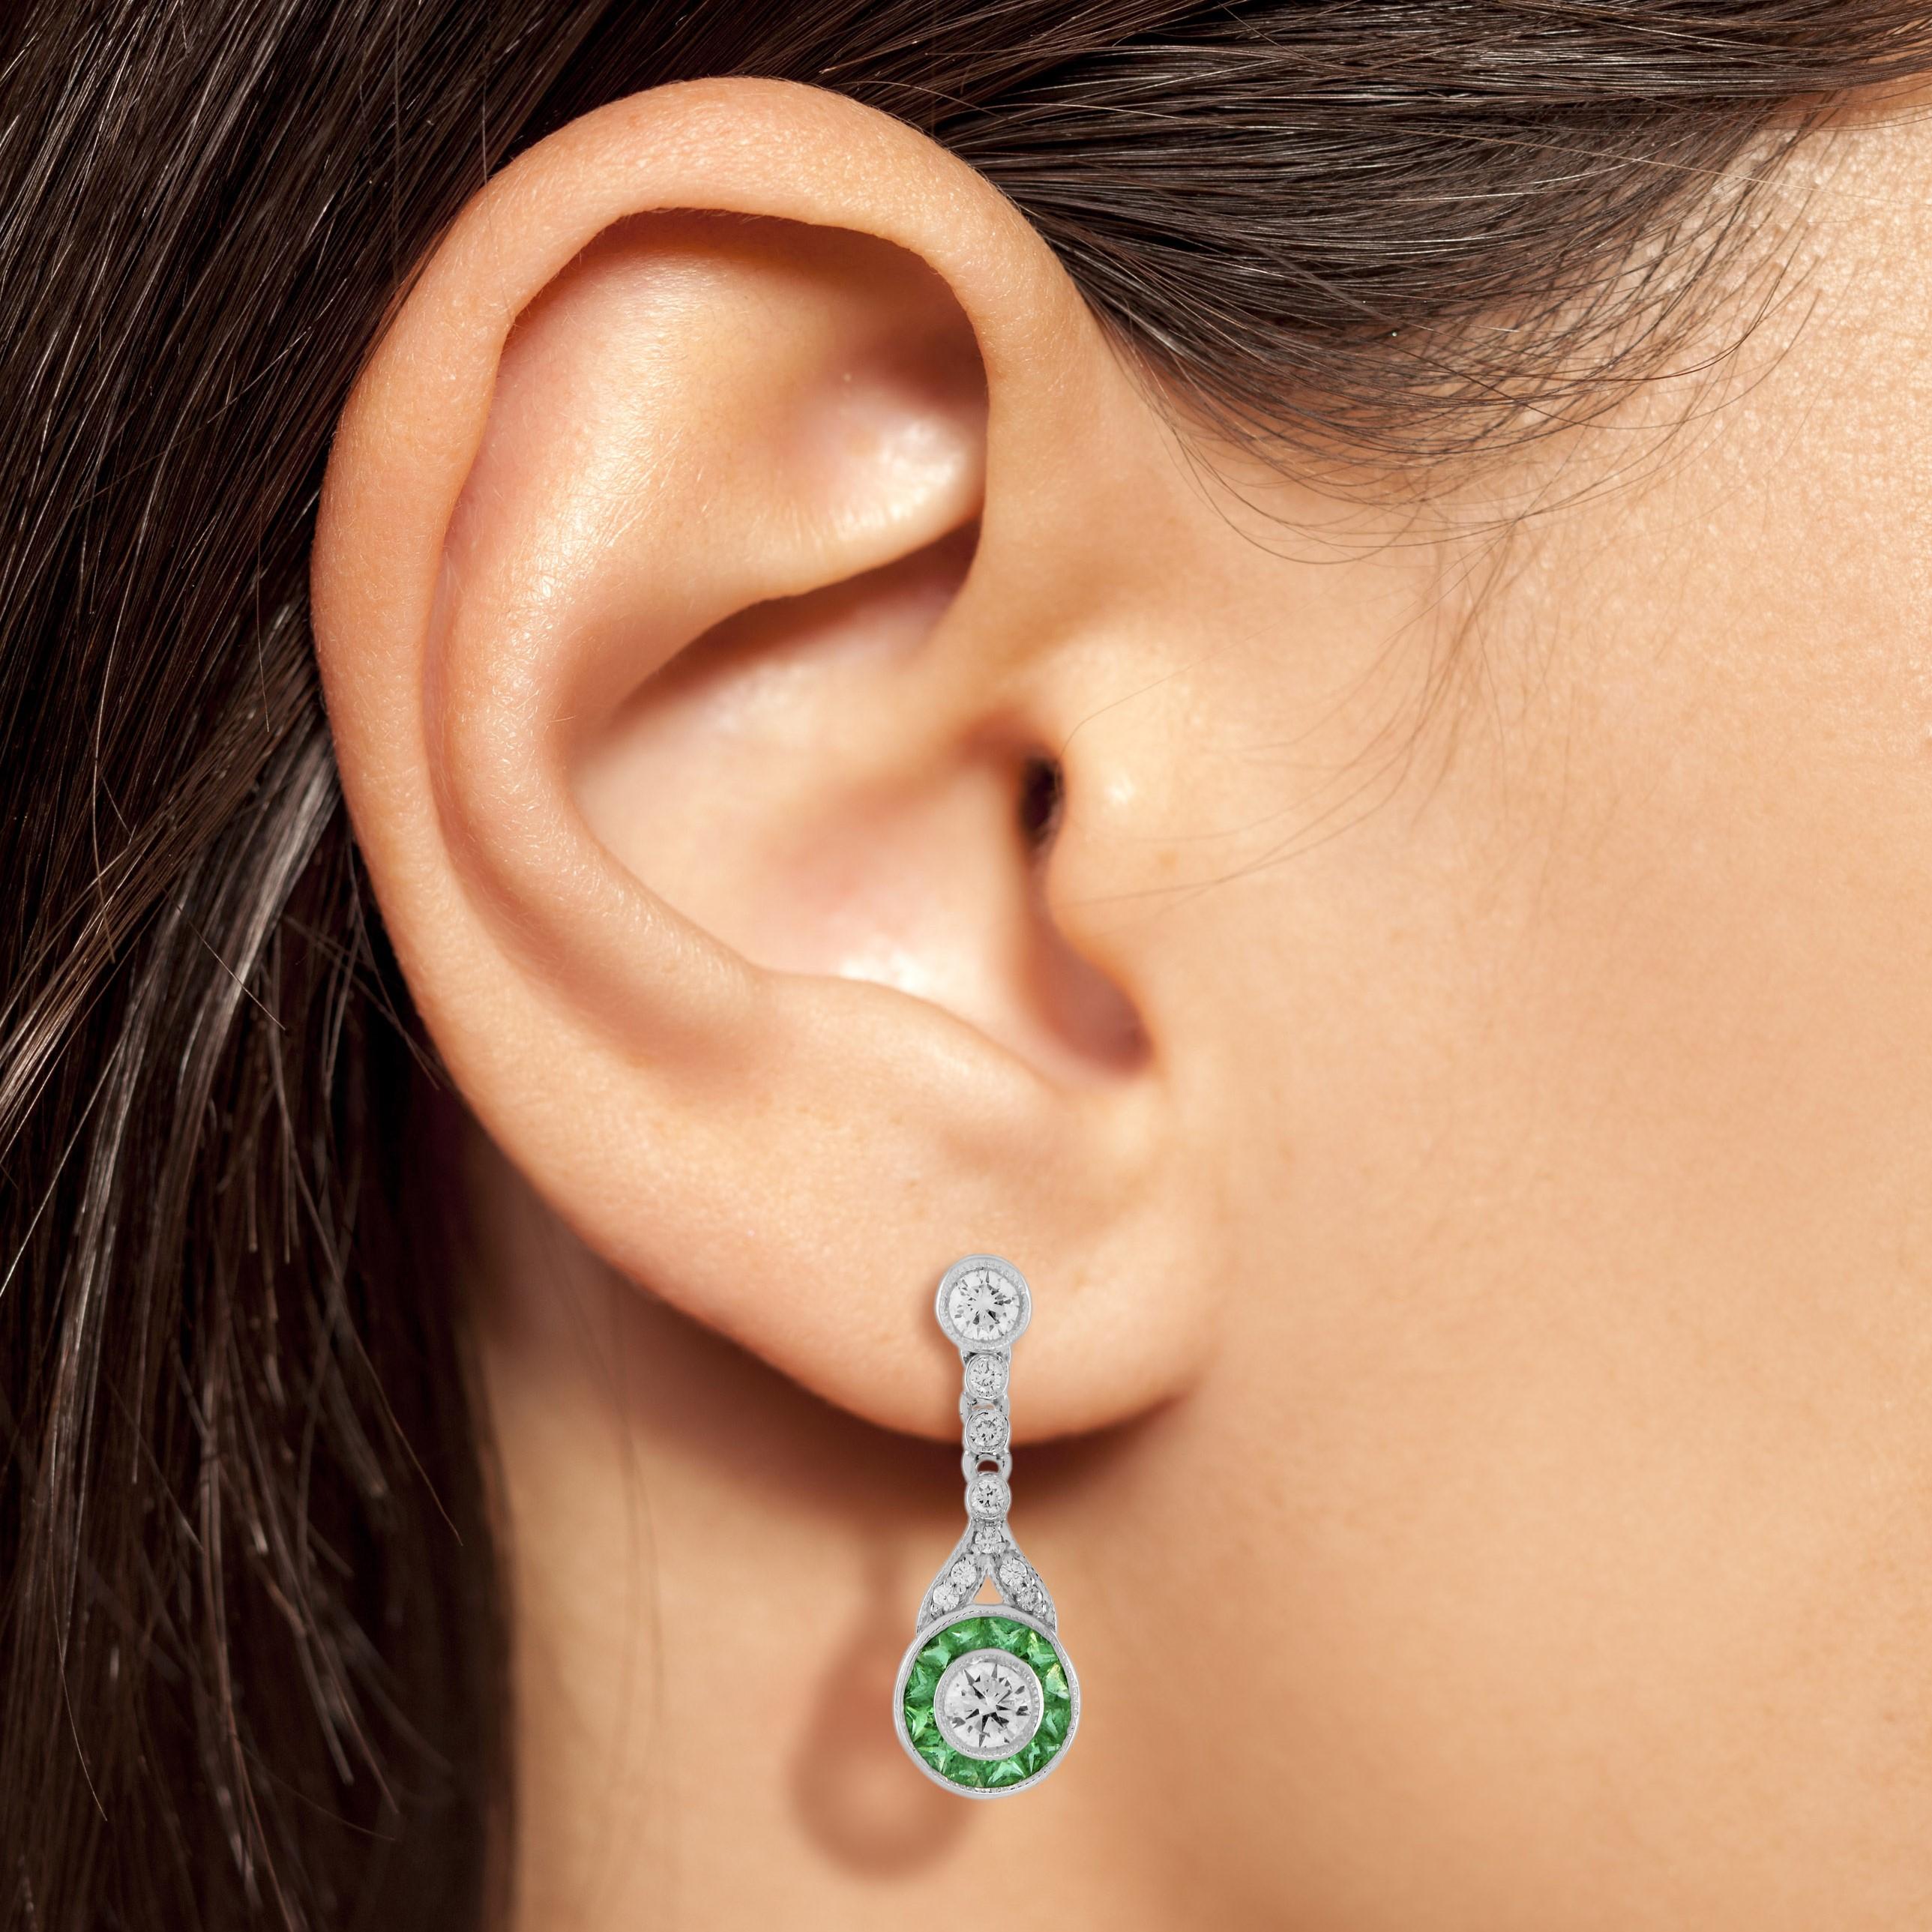 A beautiful pair of white gold earrings that are made with Art Deco era inspiration. They are set with diamond and French cut emeralds. The center diamonds is approximately 0.17 carat on each side. There is good attention to detail with fine